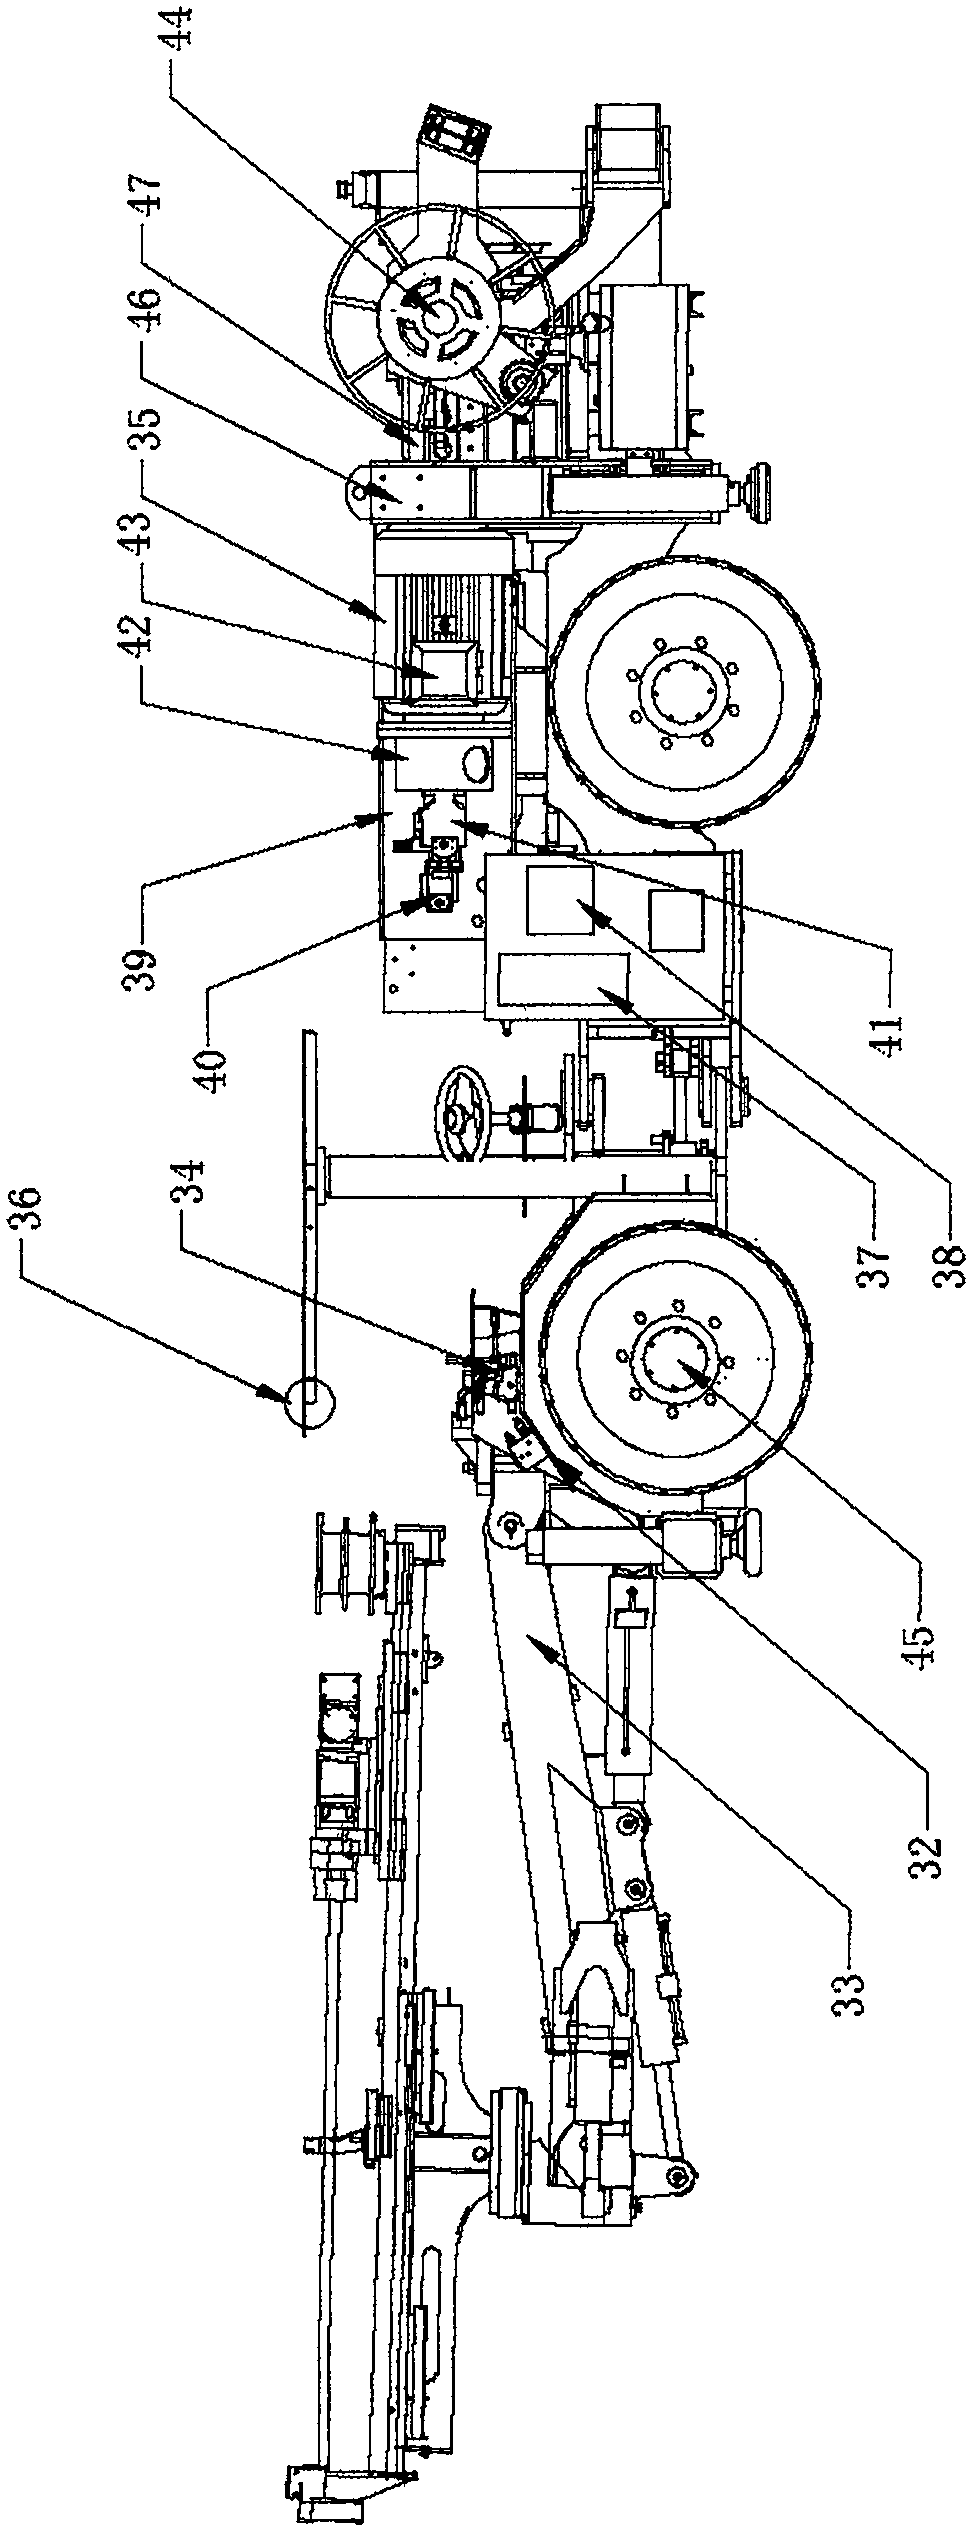 Drill jumbo with remote control function and control method thereof